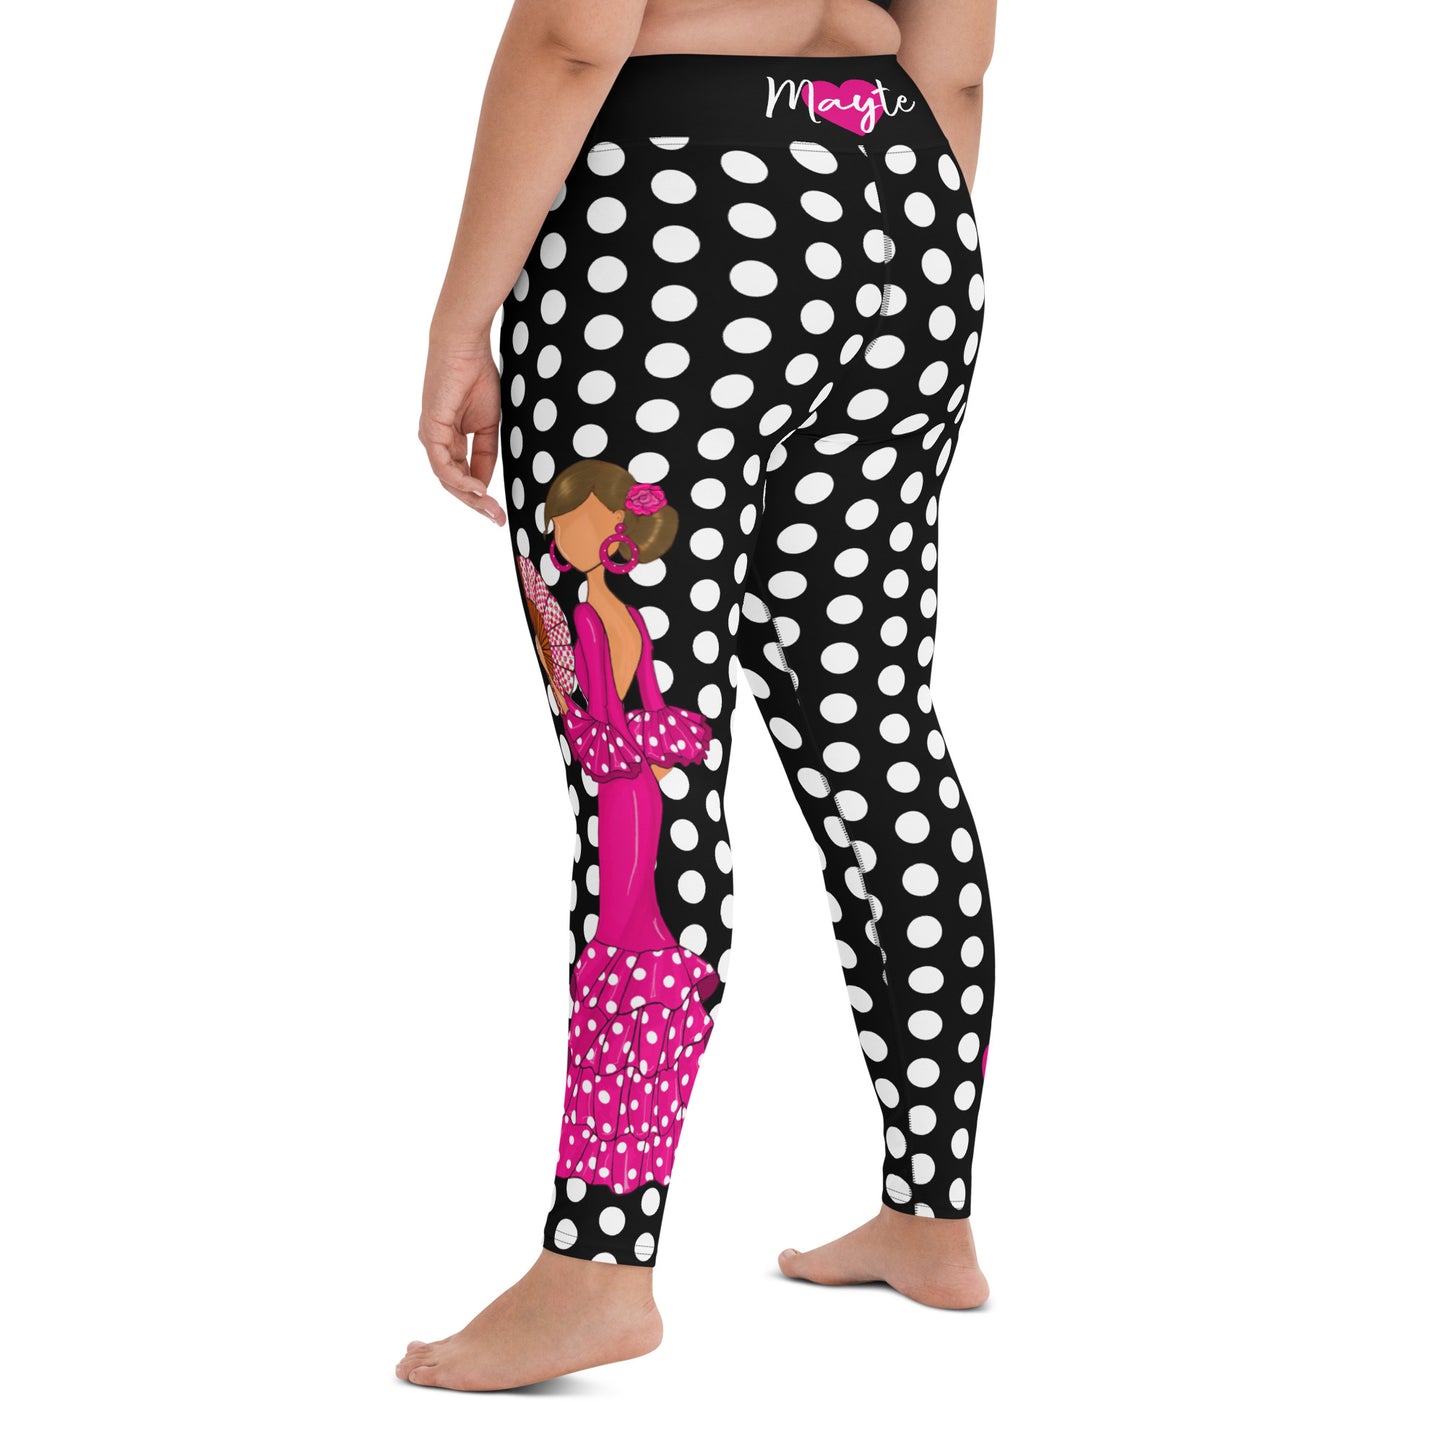 a woman's leggings with polka dots and a woman in a pink